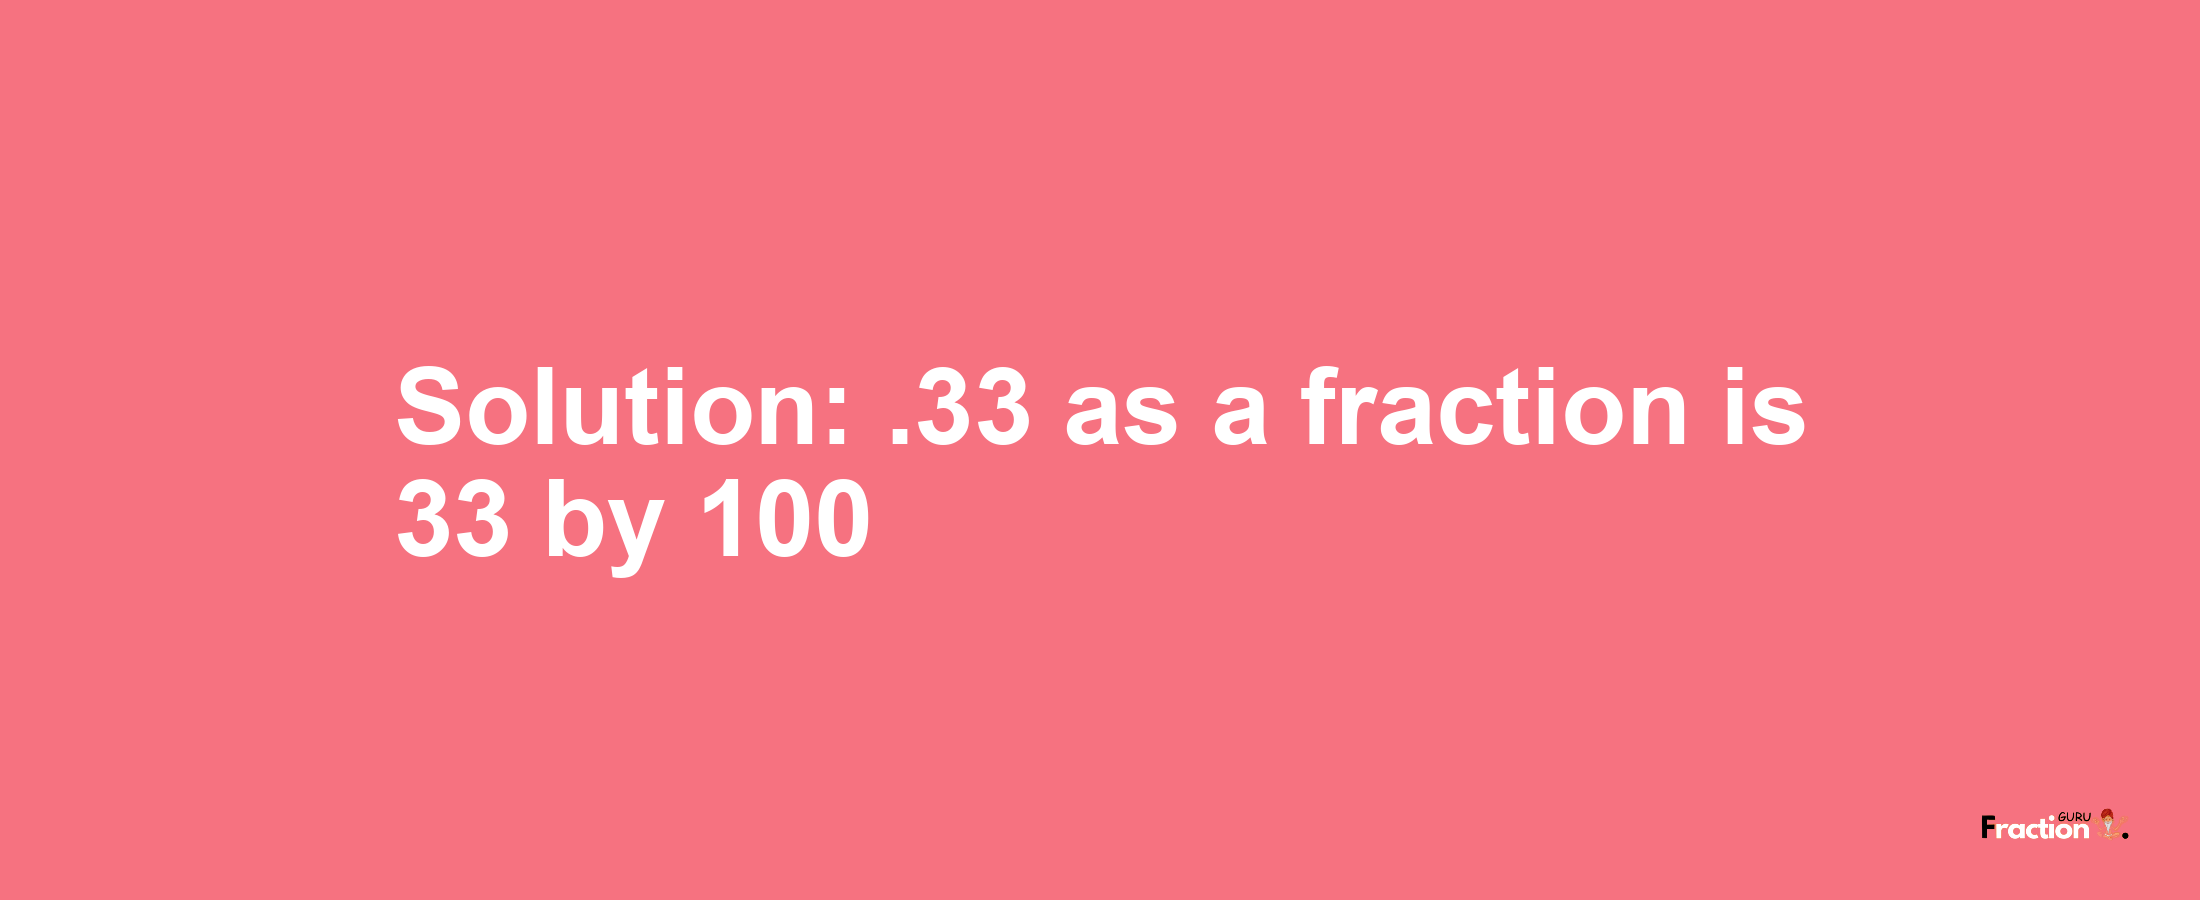 Solution:.33 as a fraction is 33/100